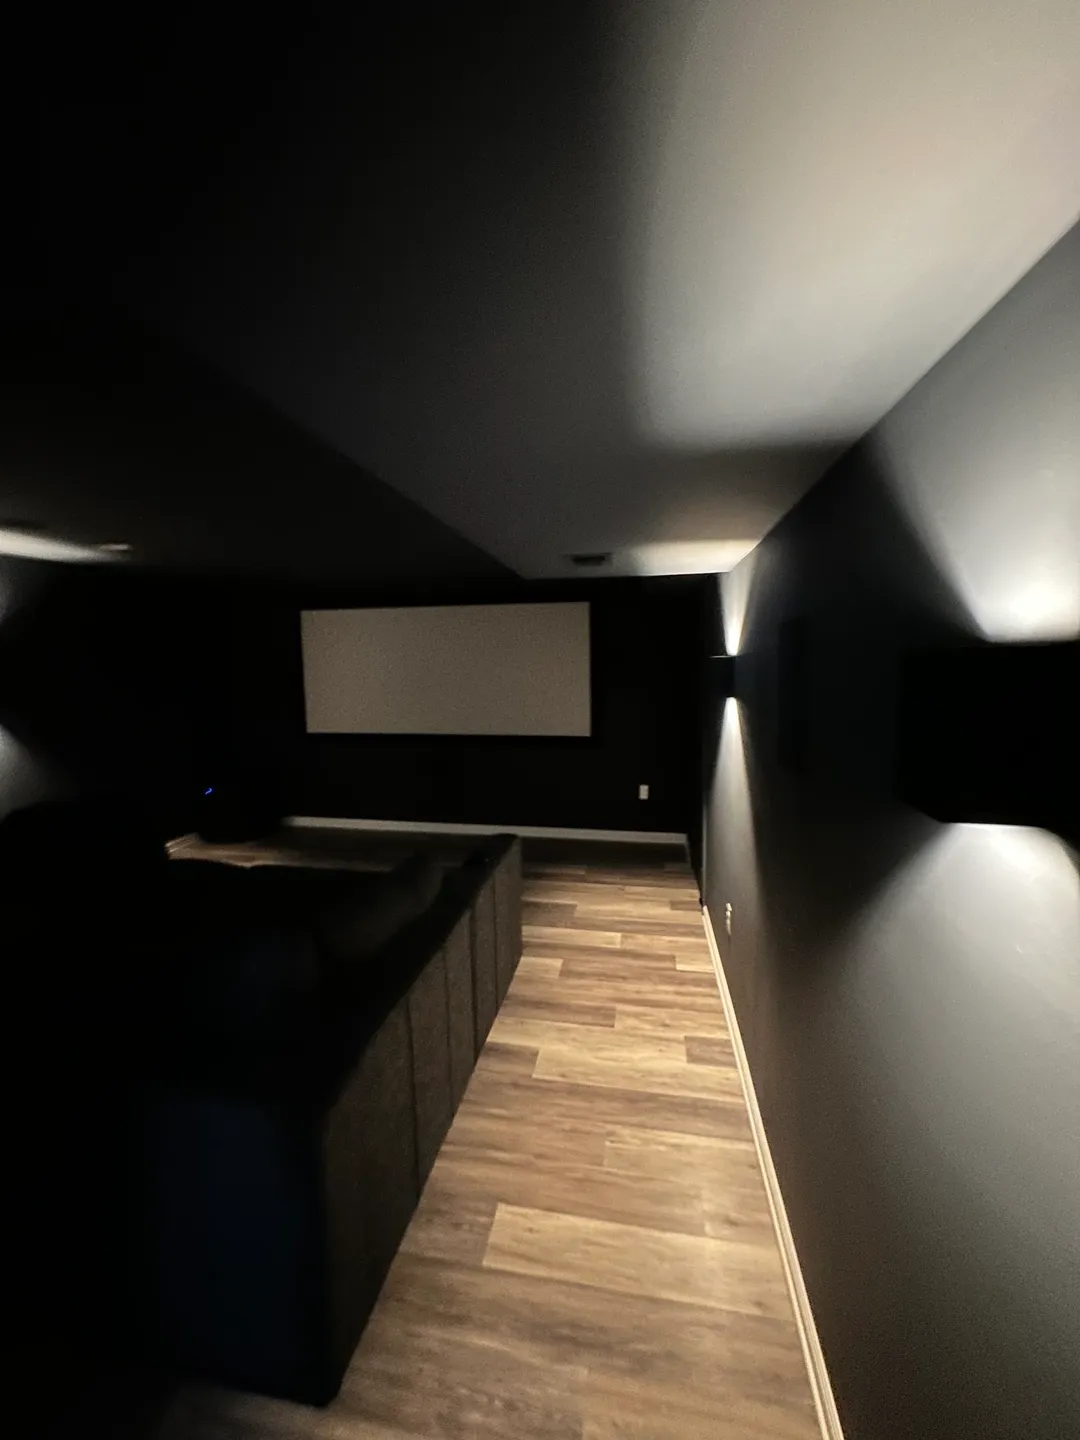 A room with a projector screen and a wooden floor